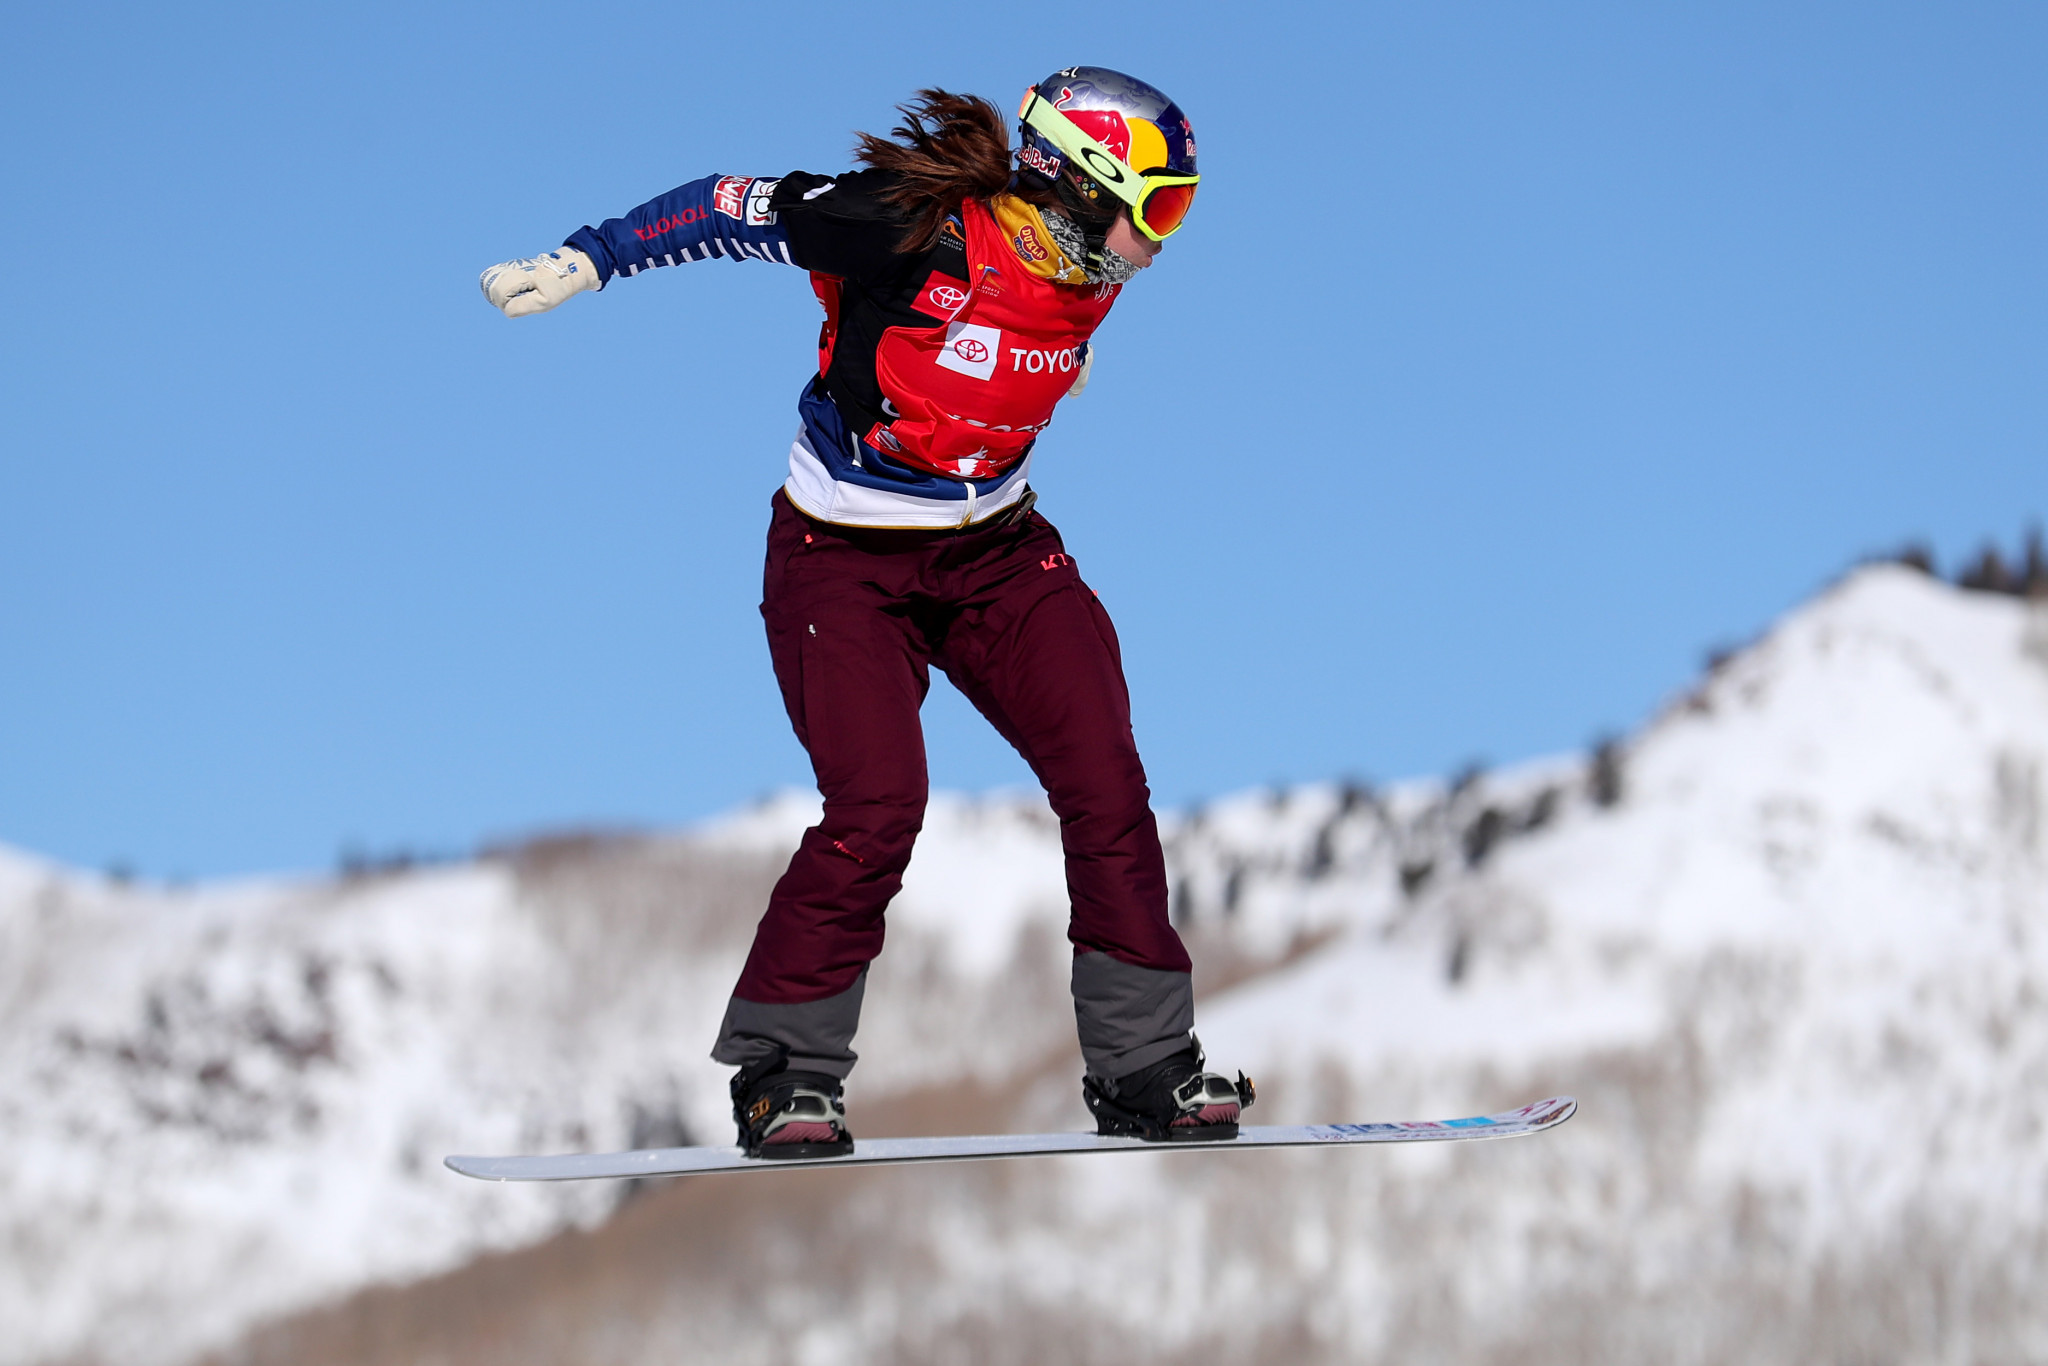 Olympic gold medallist Eva Samková of the Czech Republic ended her long wait for gold medal in the FIS Freestyle Ski and Snowboard World Championships in Utah ©Getty Images